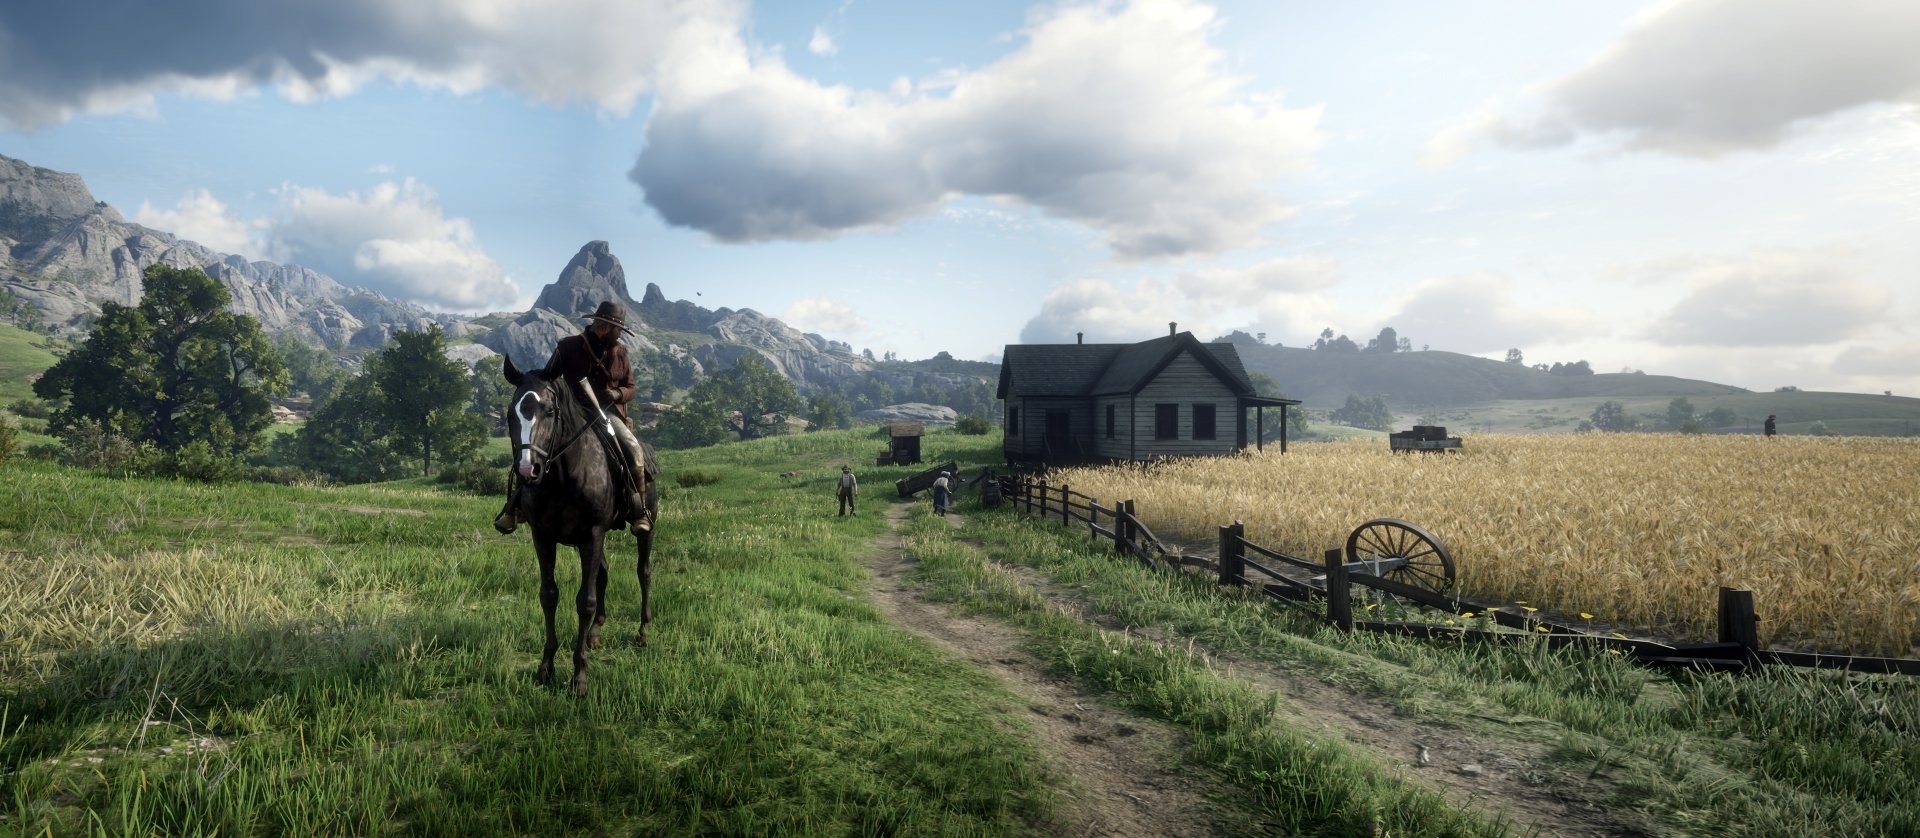 red dead redemption 2 iso pc